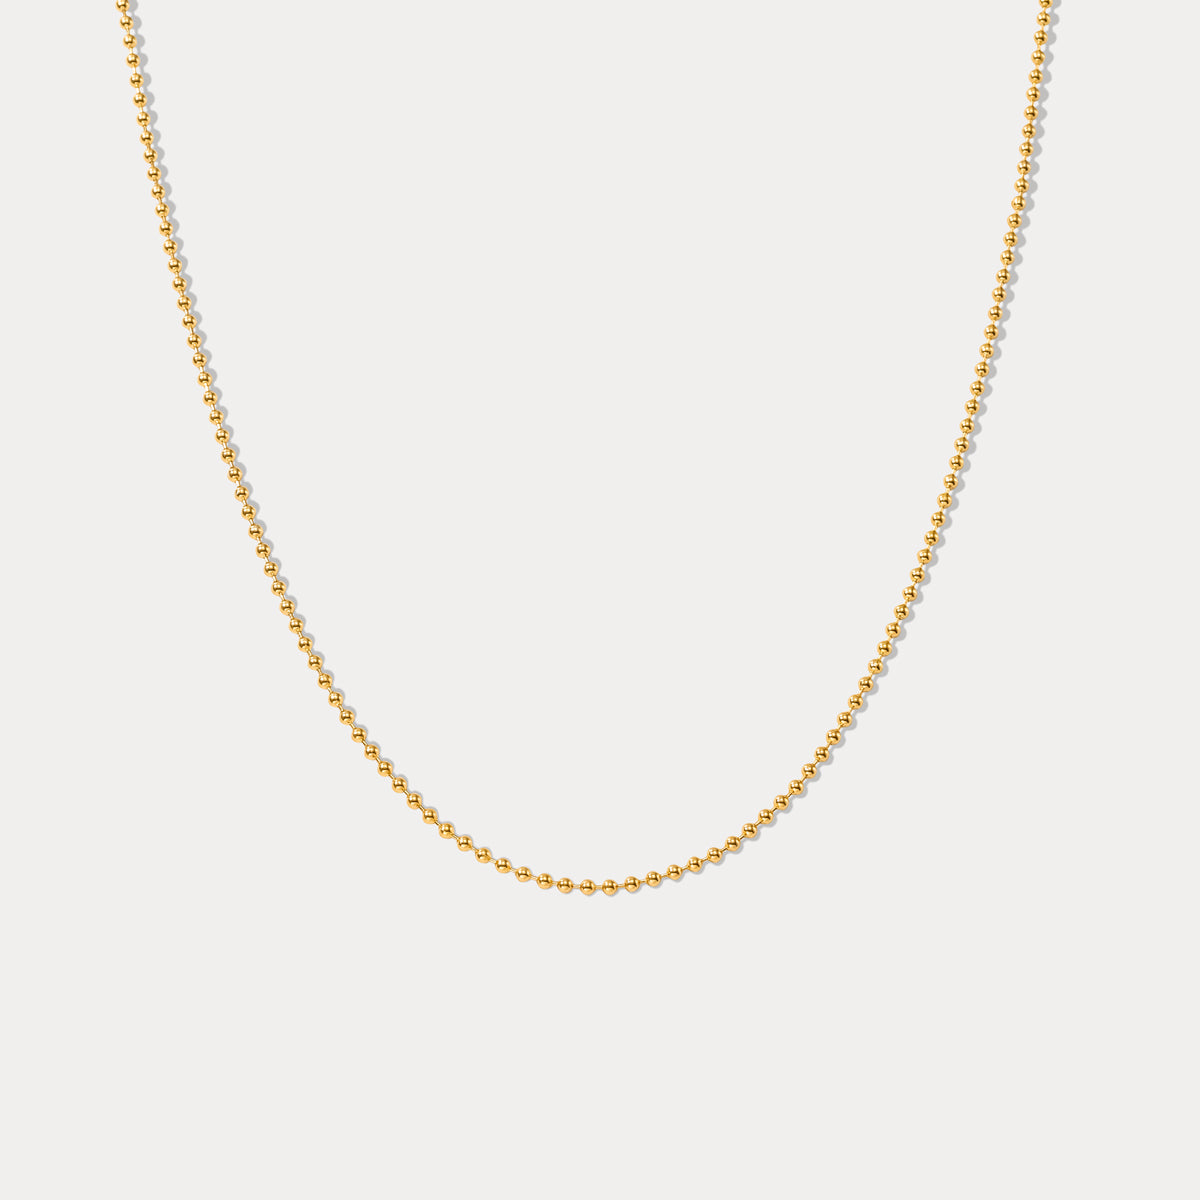 Selenichast simple gold little ball link necklace